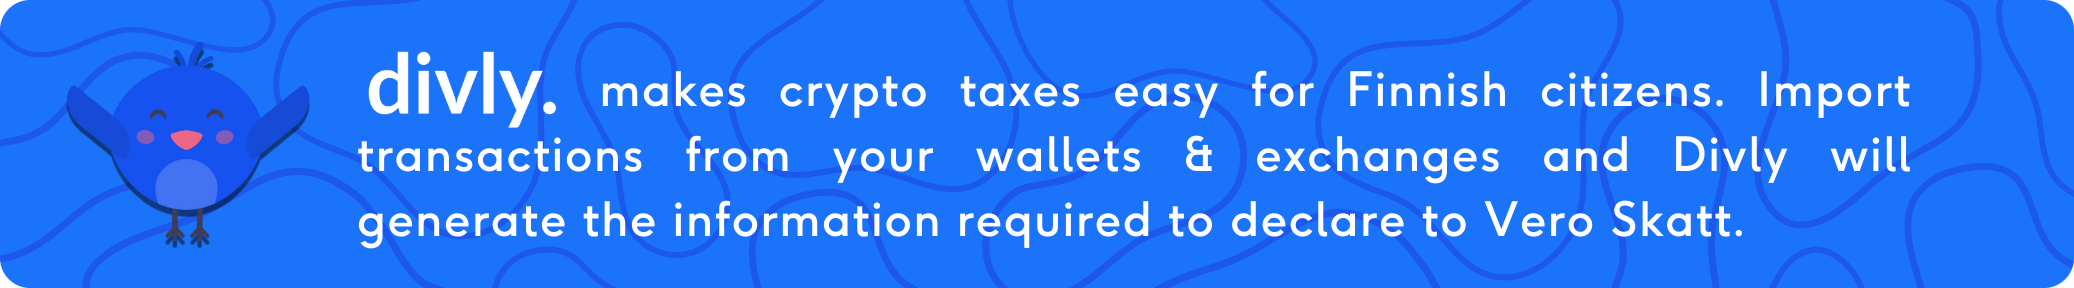 Divly makes crypto taxes easy for FInish citizens. Import transactions from your wallets & exchanges and Divly will generate the information required to declare to Vero Skatt